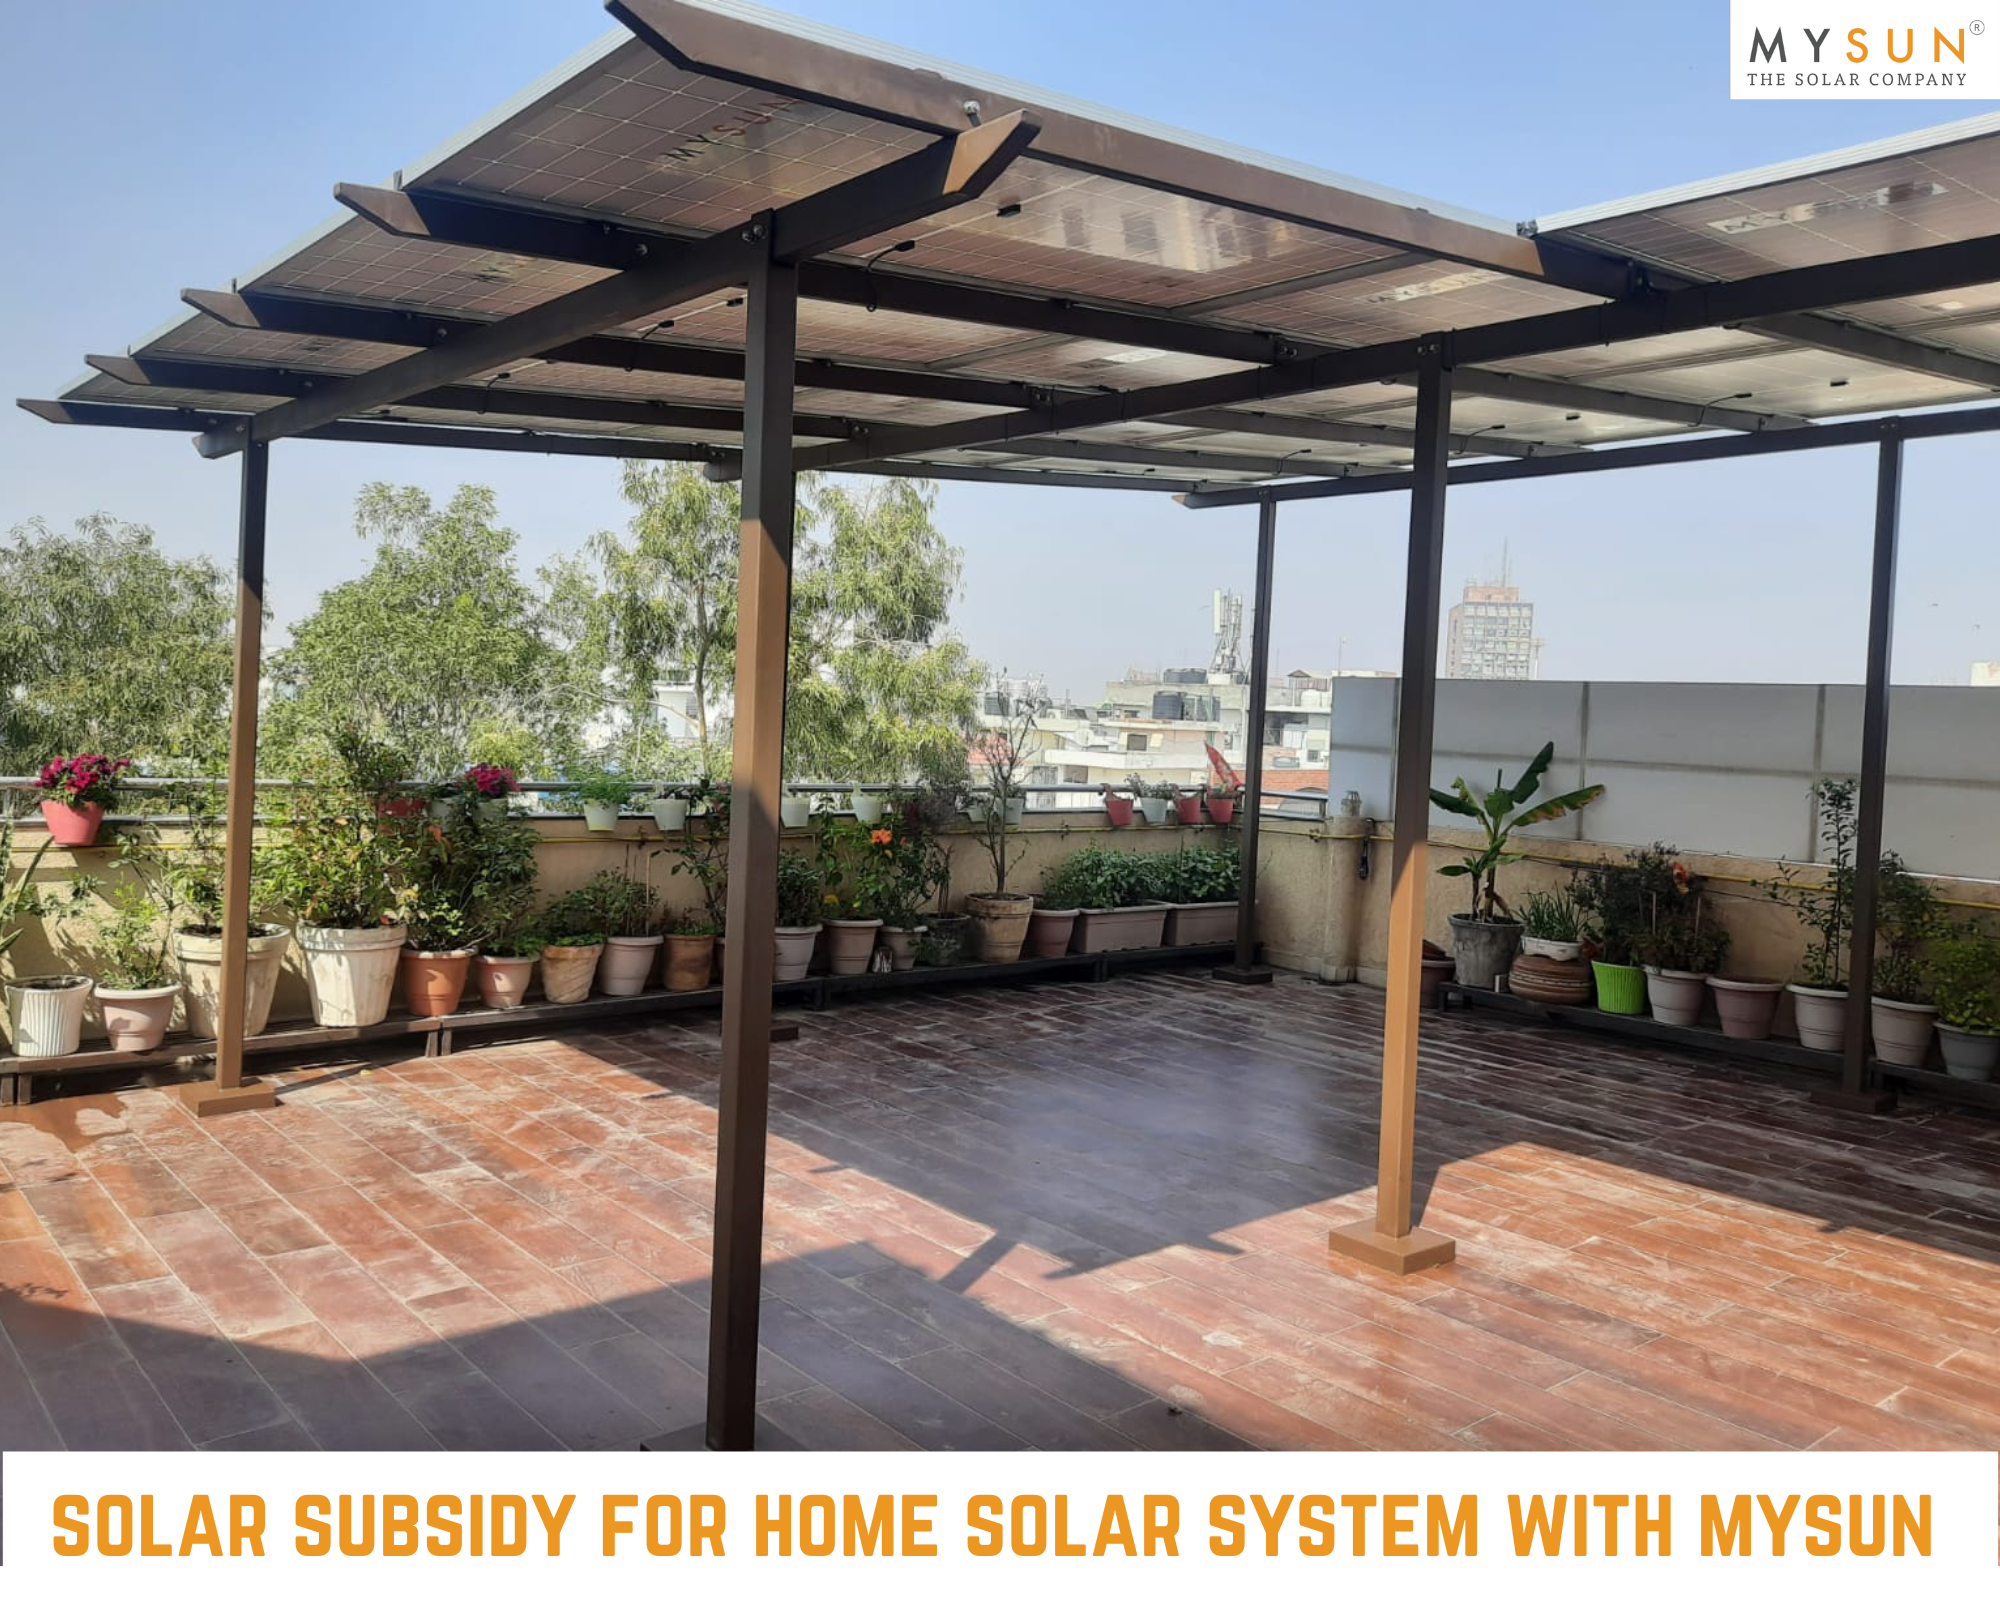 <strong>Calling the Attention of Residents of New Delhi – Don’t Miss Out on Huge Subsidy on Home Solar Systems When You Go Solar with MYSUN This Summer</strong>